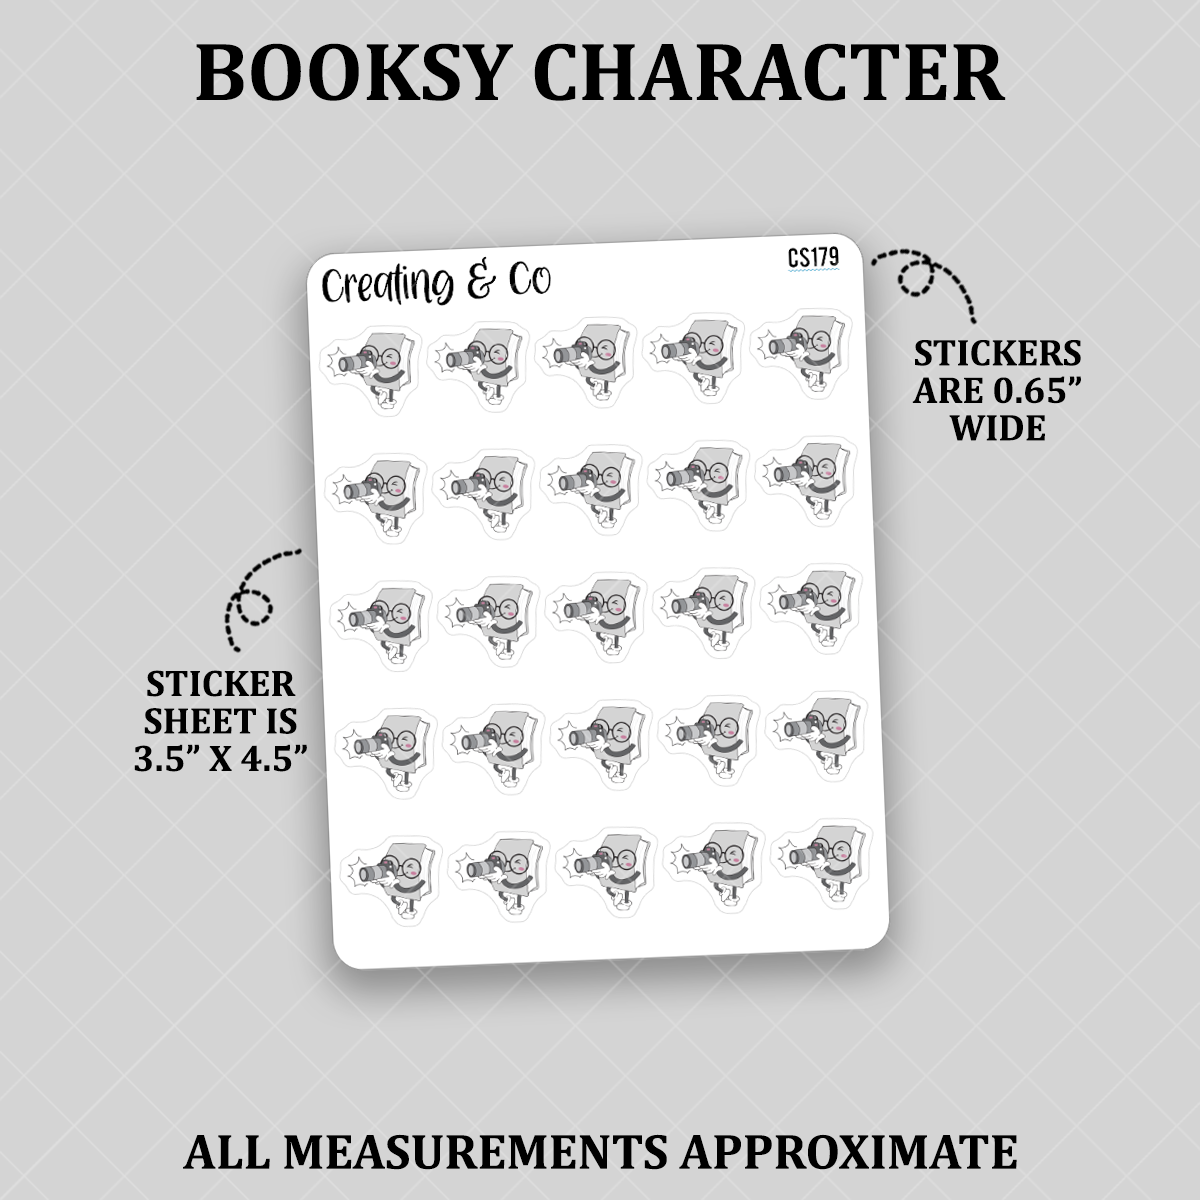 Photography Booksy Character Functional Stickers - CS179